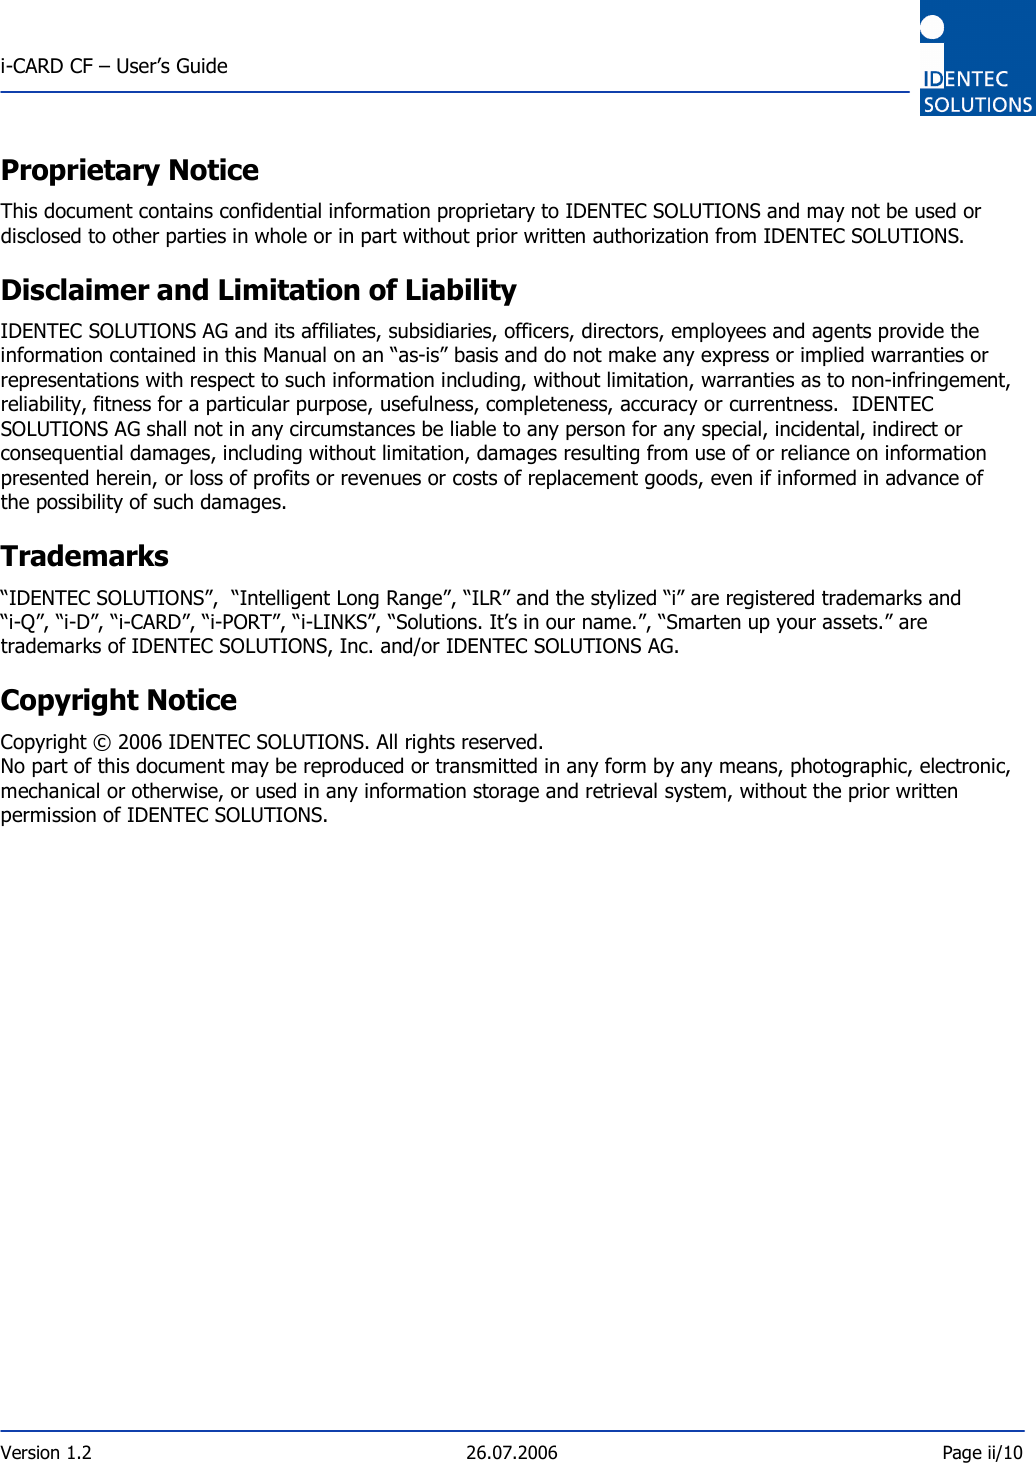  i-CARD CF – User’s Guide  Version 1.2  26.07.2006  Page ii/10    Proprietary Notice This document contains confidential information proprietary to IDENTEC SOLUTIONS and may not be used or disclosed to other parties in whole or in part without prior written authorization from IDENTEC SOLUTIONS. Disclaimer and Limitation of Liability IDENTEC SOLUTIONS AG and its affiliates, subsidiaries, officers, directors, employees and agents provide the information contained in this Manual on an “as-is” basis and do not make any express or implied warranties or representations with respect to such information including, without limitation, warranties as to non-infringement, reliability, fitness for a particular purpose, usefulness, completeness, accuracy or currentness.  IDENTEC SOLUTIONS AG shall not in any circumstances be liable to any person for any special, incidental, indirect or consequential damages, including without limitation, damages resulting from use of or reliance on information presented herein, or loss of profits or revenues or costs of replacement goods, even if informed in advance of the possibility of such damages. Trademarks “IDENTEC SOLUTIONS”,  “Intelligent Long Range”, “ILR” and the stylized “i” are registered trademarks and “i-Q”, “i-D”, “i-CARD”, “i-PORT”, “i-LINKS”, “Solutions. It’s in our name.”, “Smarten up your assets.” are trademarks of IDENTEC SOLUTIONS, Inc. and/or IDENTEC SOLUTIONS AG. Copyright Notice  Copyright © 2006 IDENTEC SOLUTIONS. All rights reserved. No part of this document may be reproduced or transmitted in any form by any means, photographic, electronic, mechanical or otherwise, or used in any information storage and retrieval system, without the prior written permission of IDENTEC SOLUTIONS.     